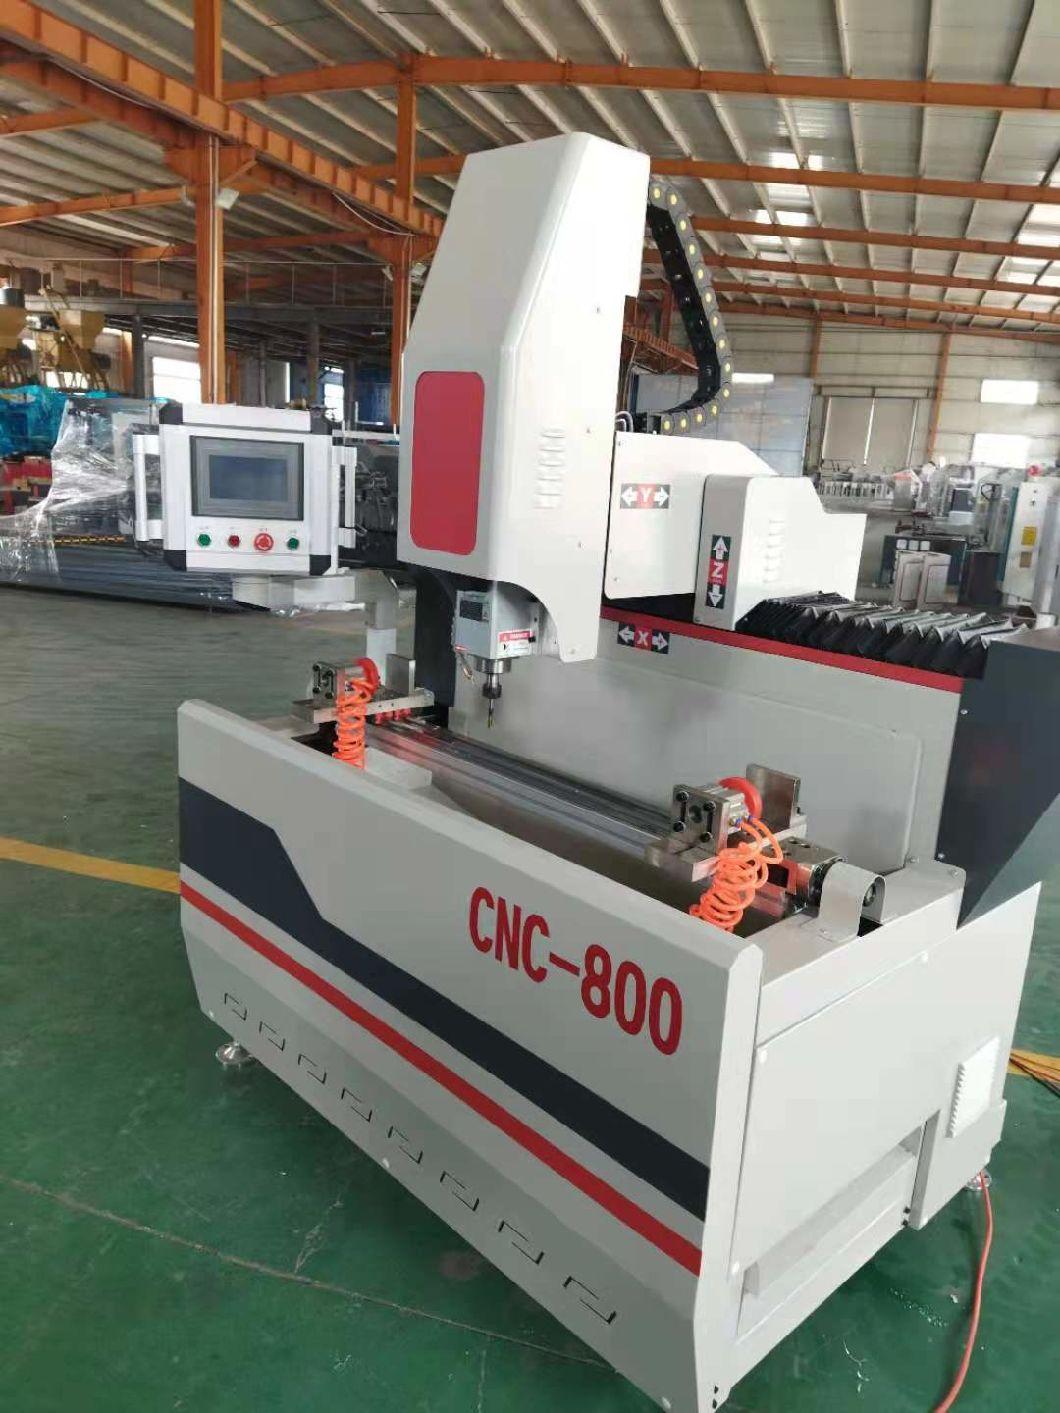 Lxf-CNC-800 CNC Drilling and Milling Machine for The Processing of Round Holes of Industrial Aluminum Alloy Profiles for Doors and Windows Making